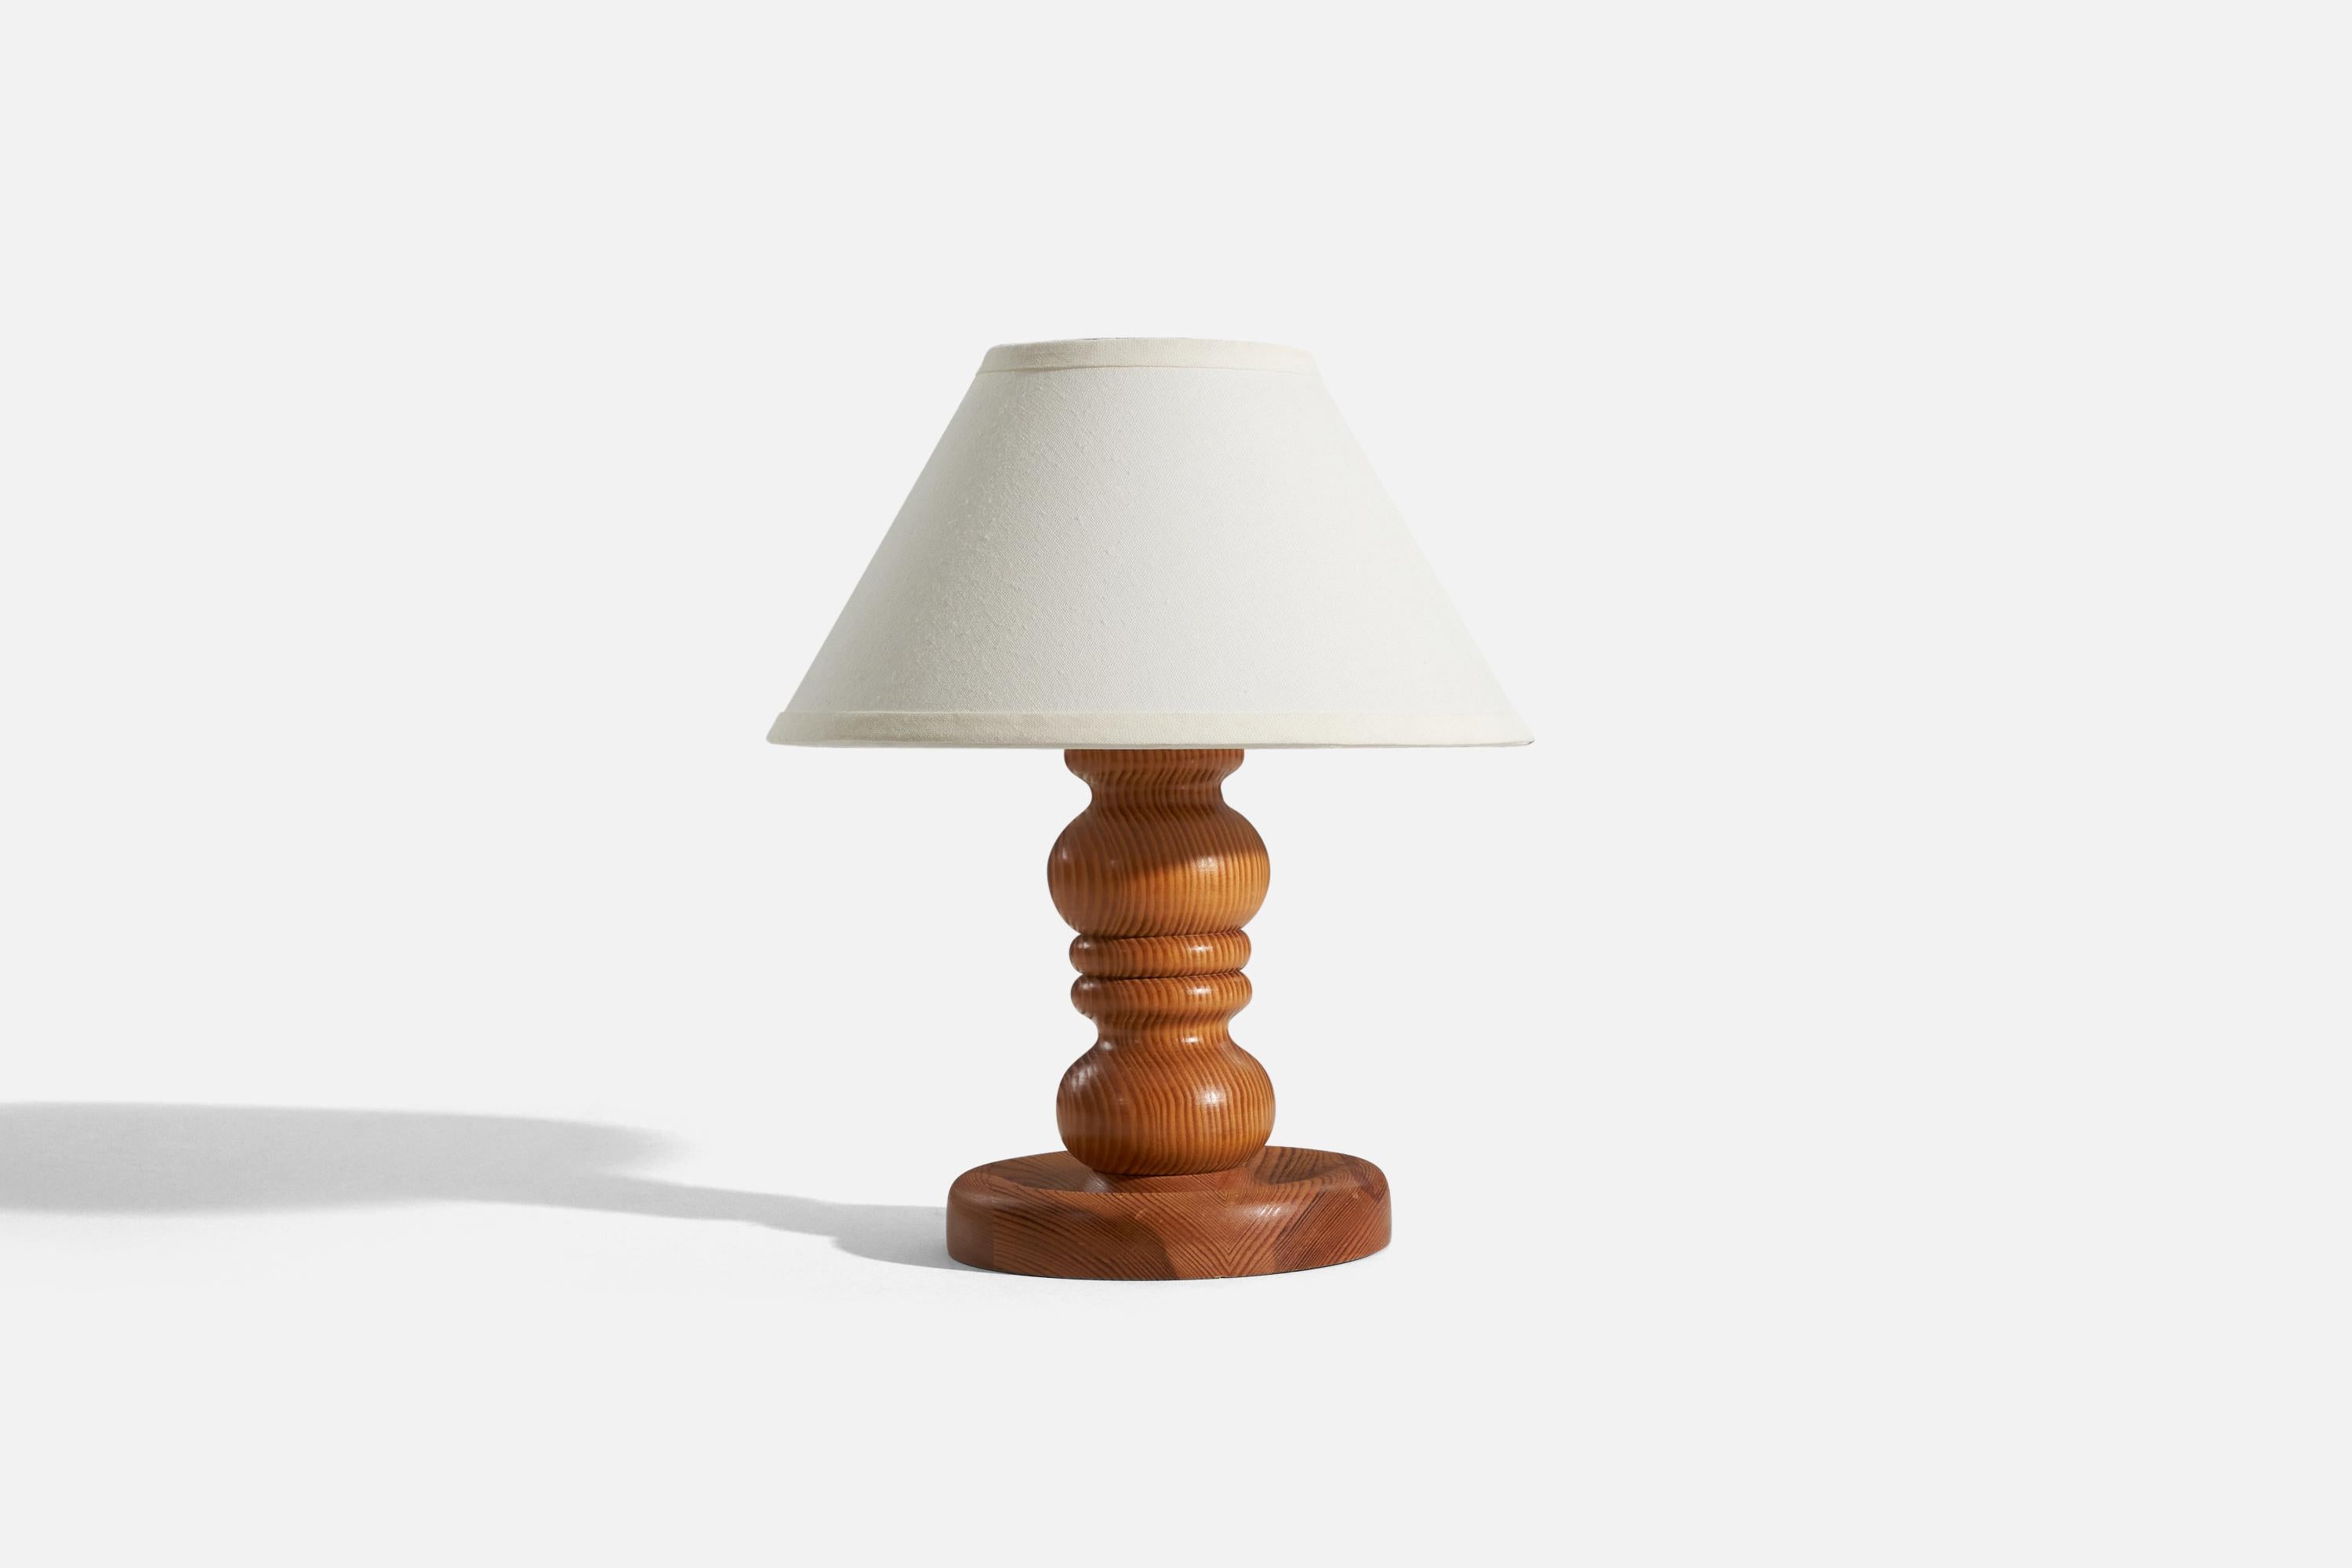 A solid pine table lamp designed and produced in Sweden, c. 1970s.

Sold without lampshade. 
Dimensions of Lamp (inches) : 11.1875 x 7 x 7 (H x W x D)
Dimensions of Shade (inches) : 5.25 x 12.25 x 7.25 (T x B x H)
Dimension of Lamp with Shade